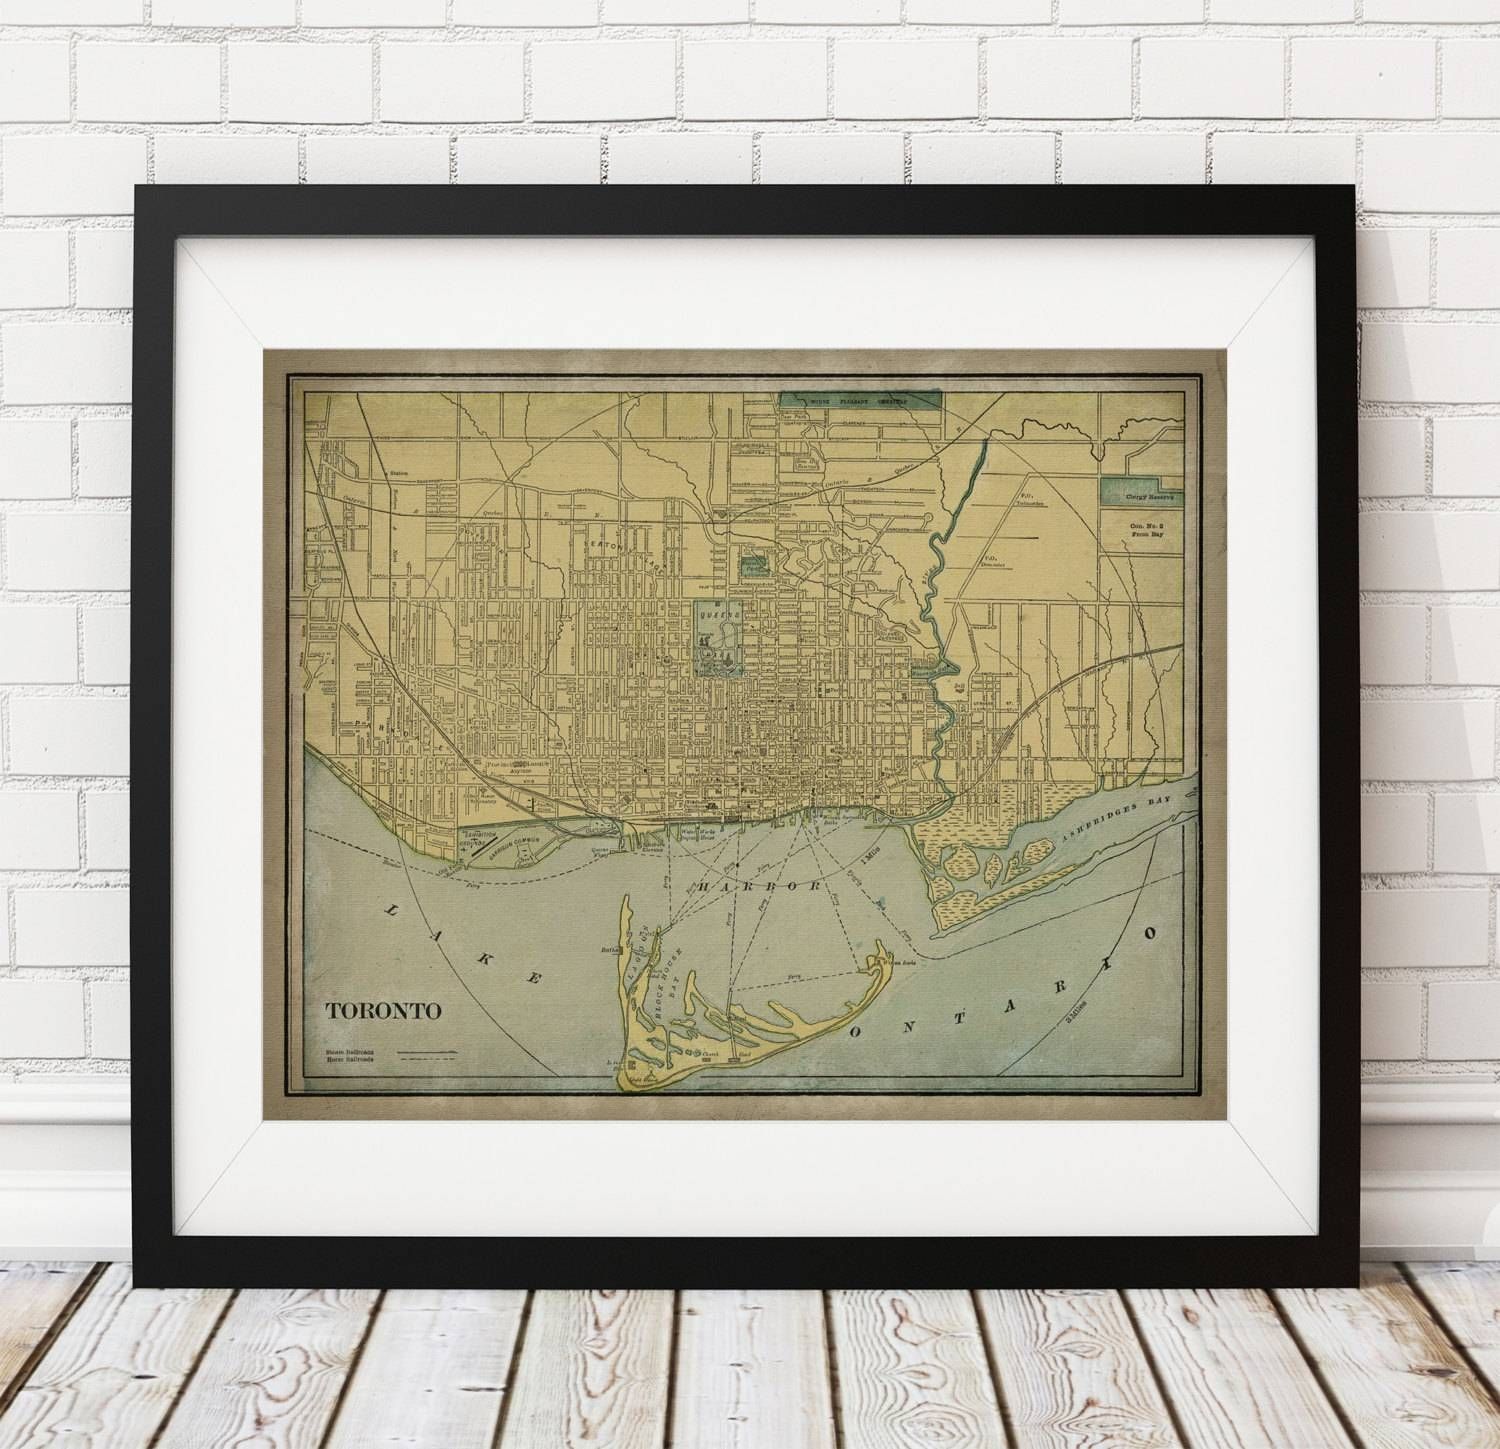 Toronto Map Print, Vintage Map Art, Antique Map, Canadian Wall Art Pertaining To Latest Map Wall Art Toronto (View 1 of 20)